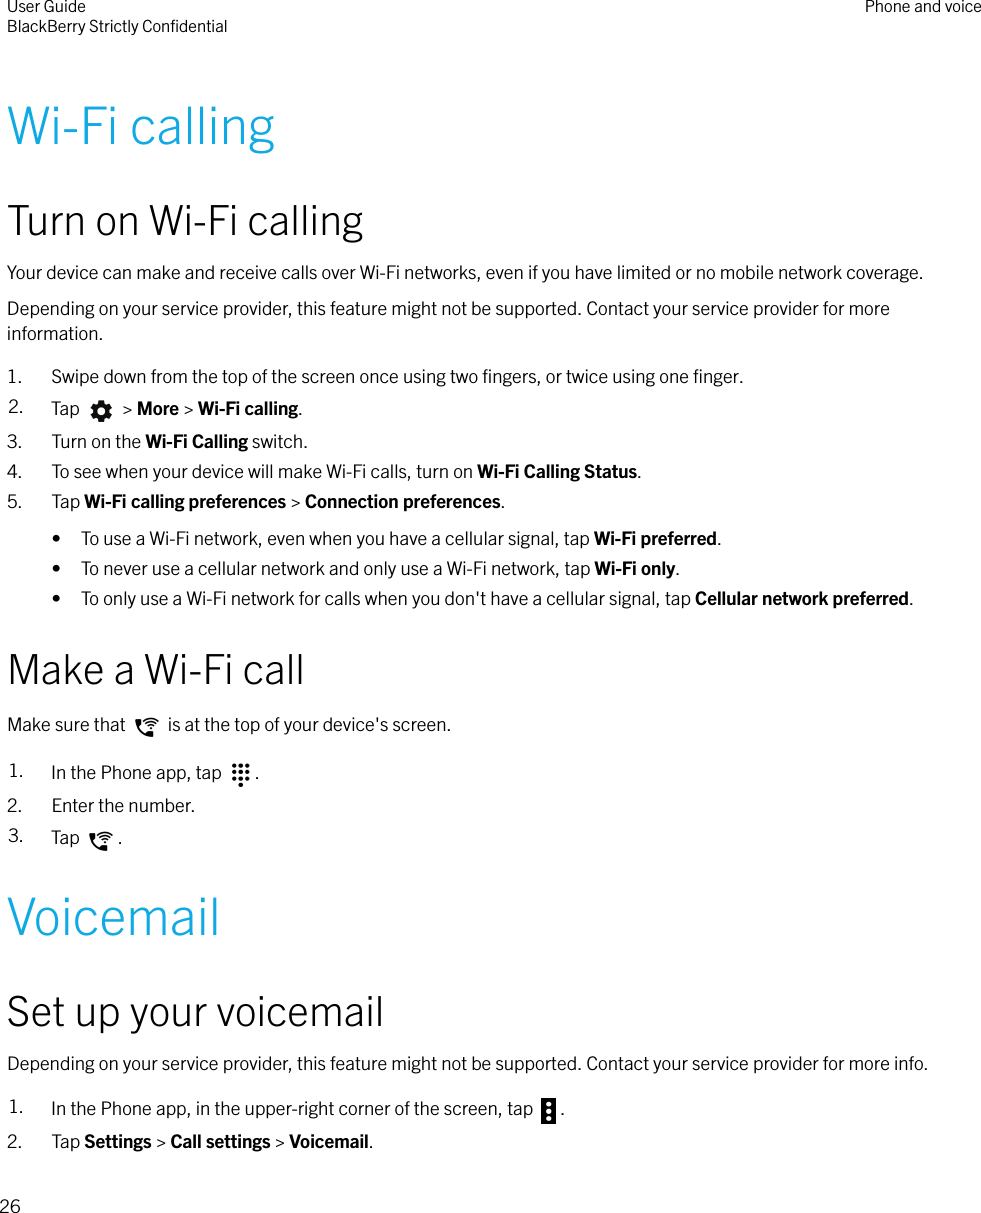 Wi-Fi callingTurn on Wi-Fi callingYour device can make and receive calls over Wi-Fi networks, even if you have limited or no mobile network coverage.Depending on your service provider, this feature might not be supported. Contact your service provider for moreinformation.1. Swipe down from the top of the screen once using two ﬁngers, or twice using one ﬁnger.2. Tap   &gt; More &gt; Wi-Fi calling.3. Turn on the Wi-Fi Calling switch.4. To see when your device will make Wi-Fi calls, turn on Wi-Fi Calling Status.5. Tap Wi-Fi calling preferences &gt; Connection preferences.• To use a Wi-Fi network, even when you have a cellular signal, tap Wi-Fi preferred.• To never use a cellular network and only use a Wi-Fi network, tap Wi-Fi only.• To only use a Wi-Fi network for calls when you don&apos;t have a cellular signal, tap Cellular network preferred.Make a Wi-Fi callMake sure that   is at the top of your device&apos;s screen.1. In the Phone app, tap  .2. Enter the number.3. Tap  .VoicemailSet up your voicemailDepending on your service provider, this feature might not be supported. Contact your service provider for more info.1. In the Phone app, in the upper-right corner of the screen, tap  .2. Tap Settings &gt; Call settings &gt; Voicemail.User GuideBlackBerry Strictly ConﬁdentialPhone and voice26